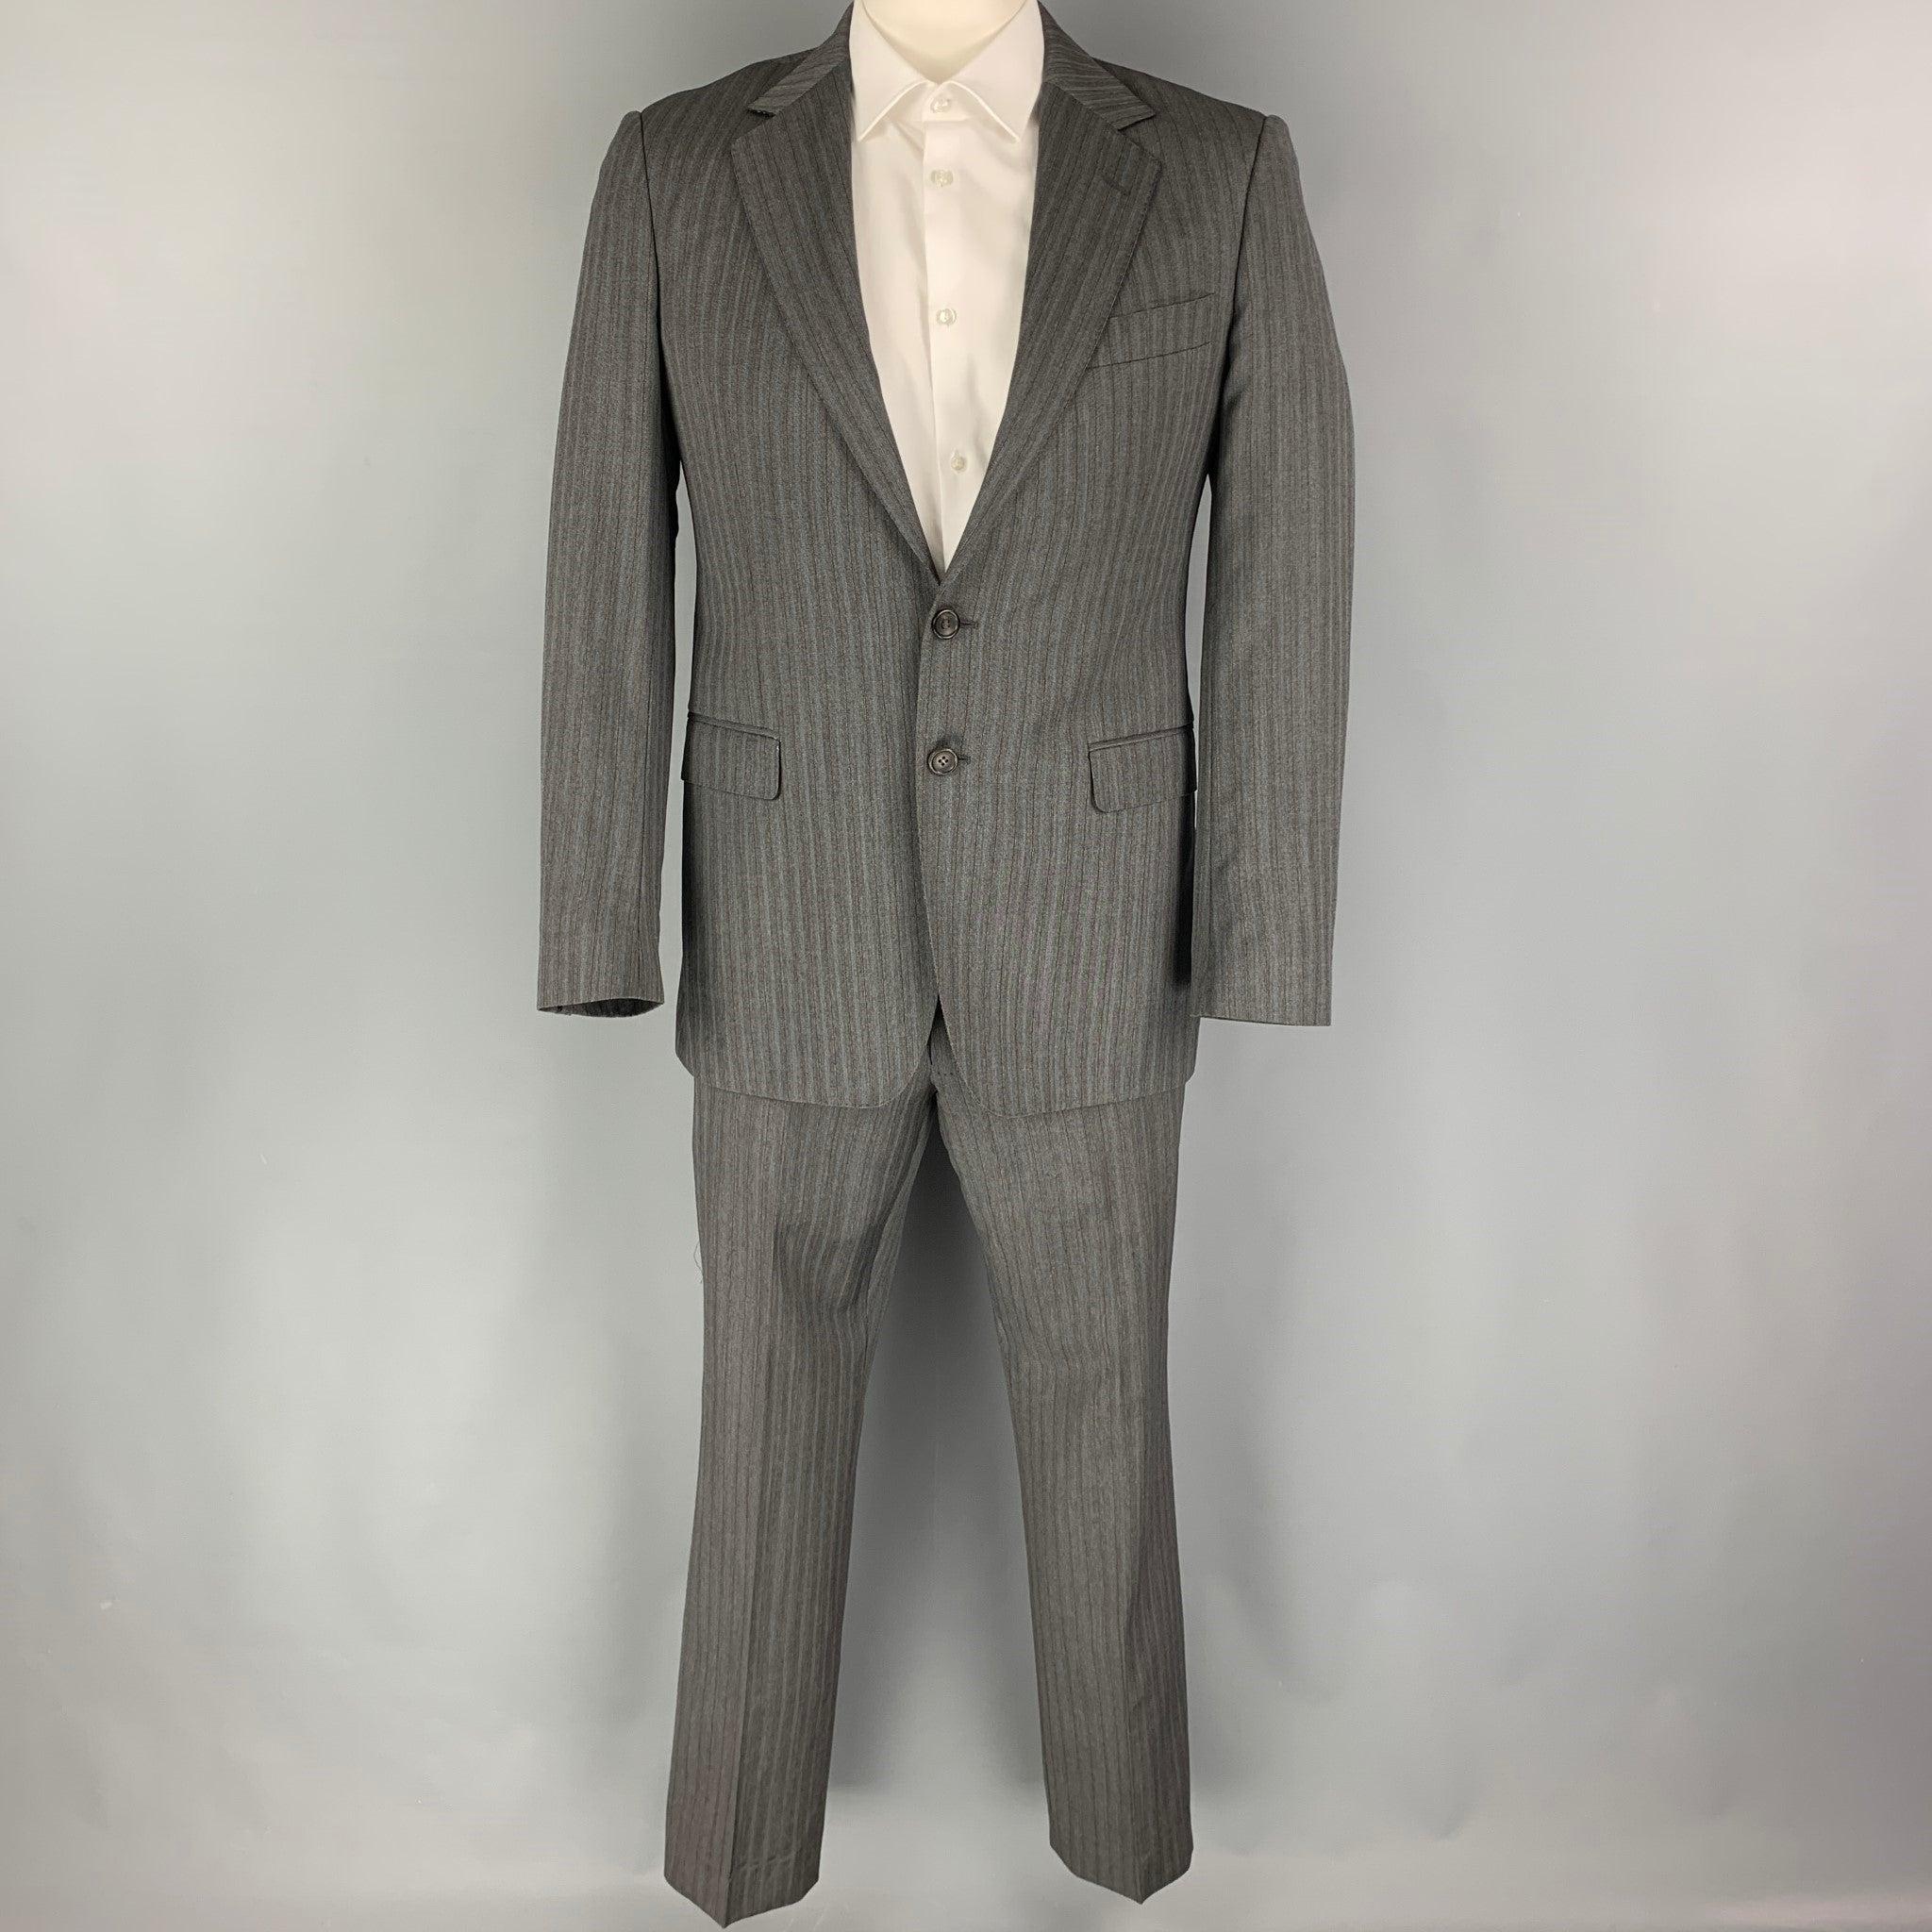 GUCCI
suit comes in a grey & blue stripe wool with a full liner and includes a single breasted, double button sport coat with a notch lapel and matching flat front trousers. Good Pre-Owned Condition. Moderate wear at pants interior. As-is. 